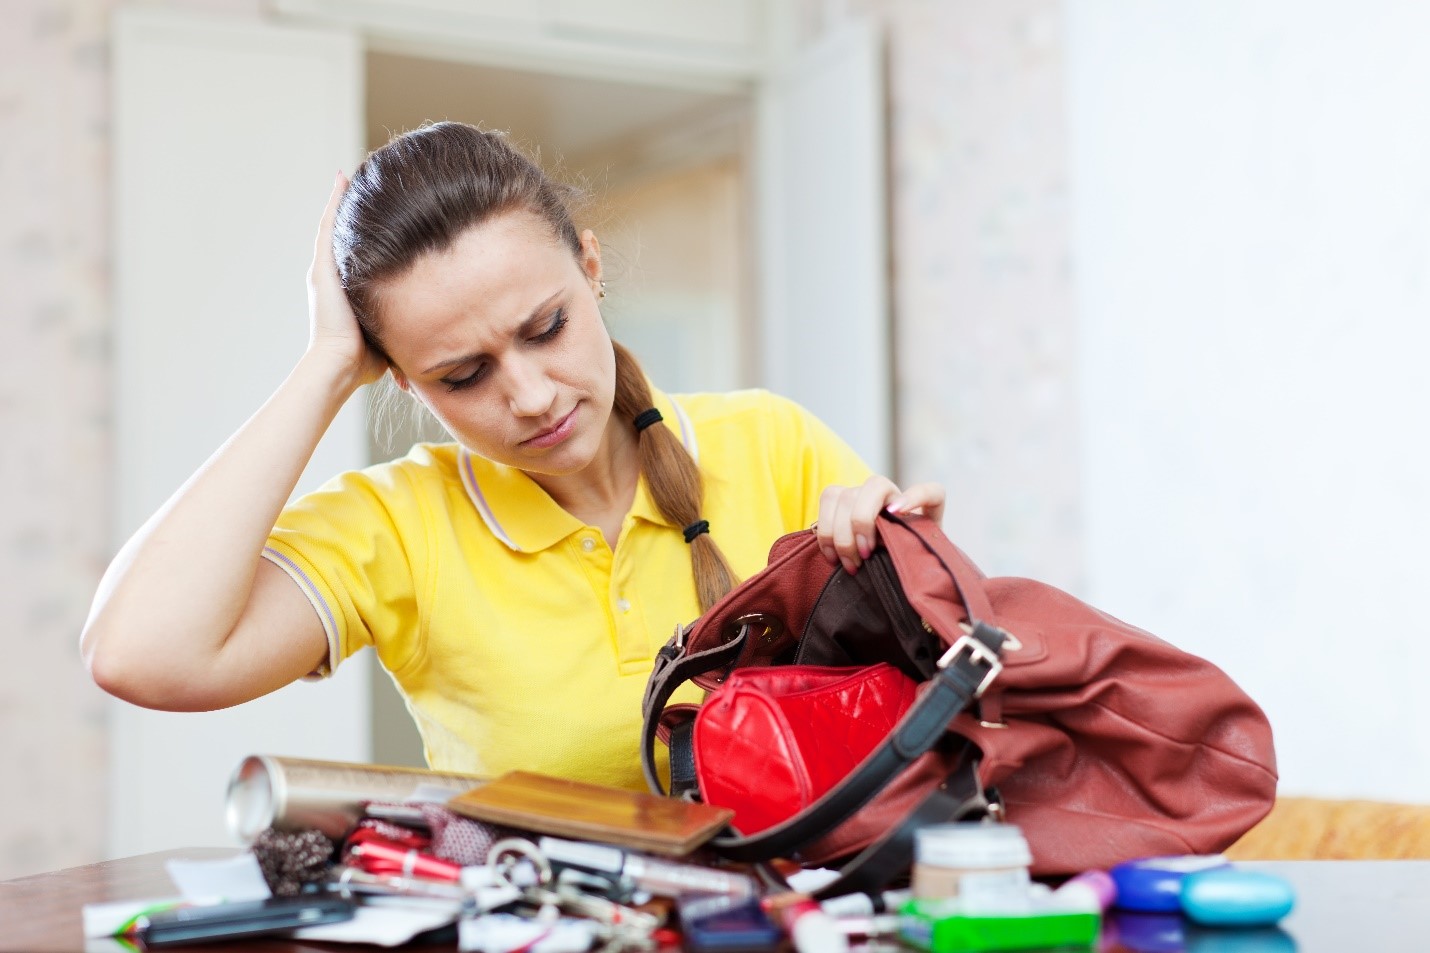 What To Do When You Lose Your Wallet or Purse | IDTheftAuthority.com